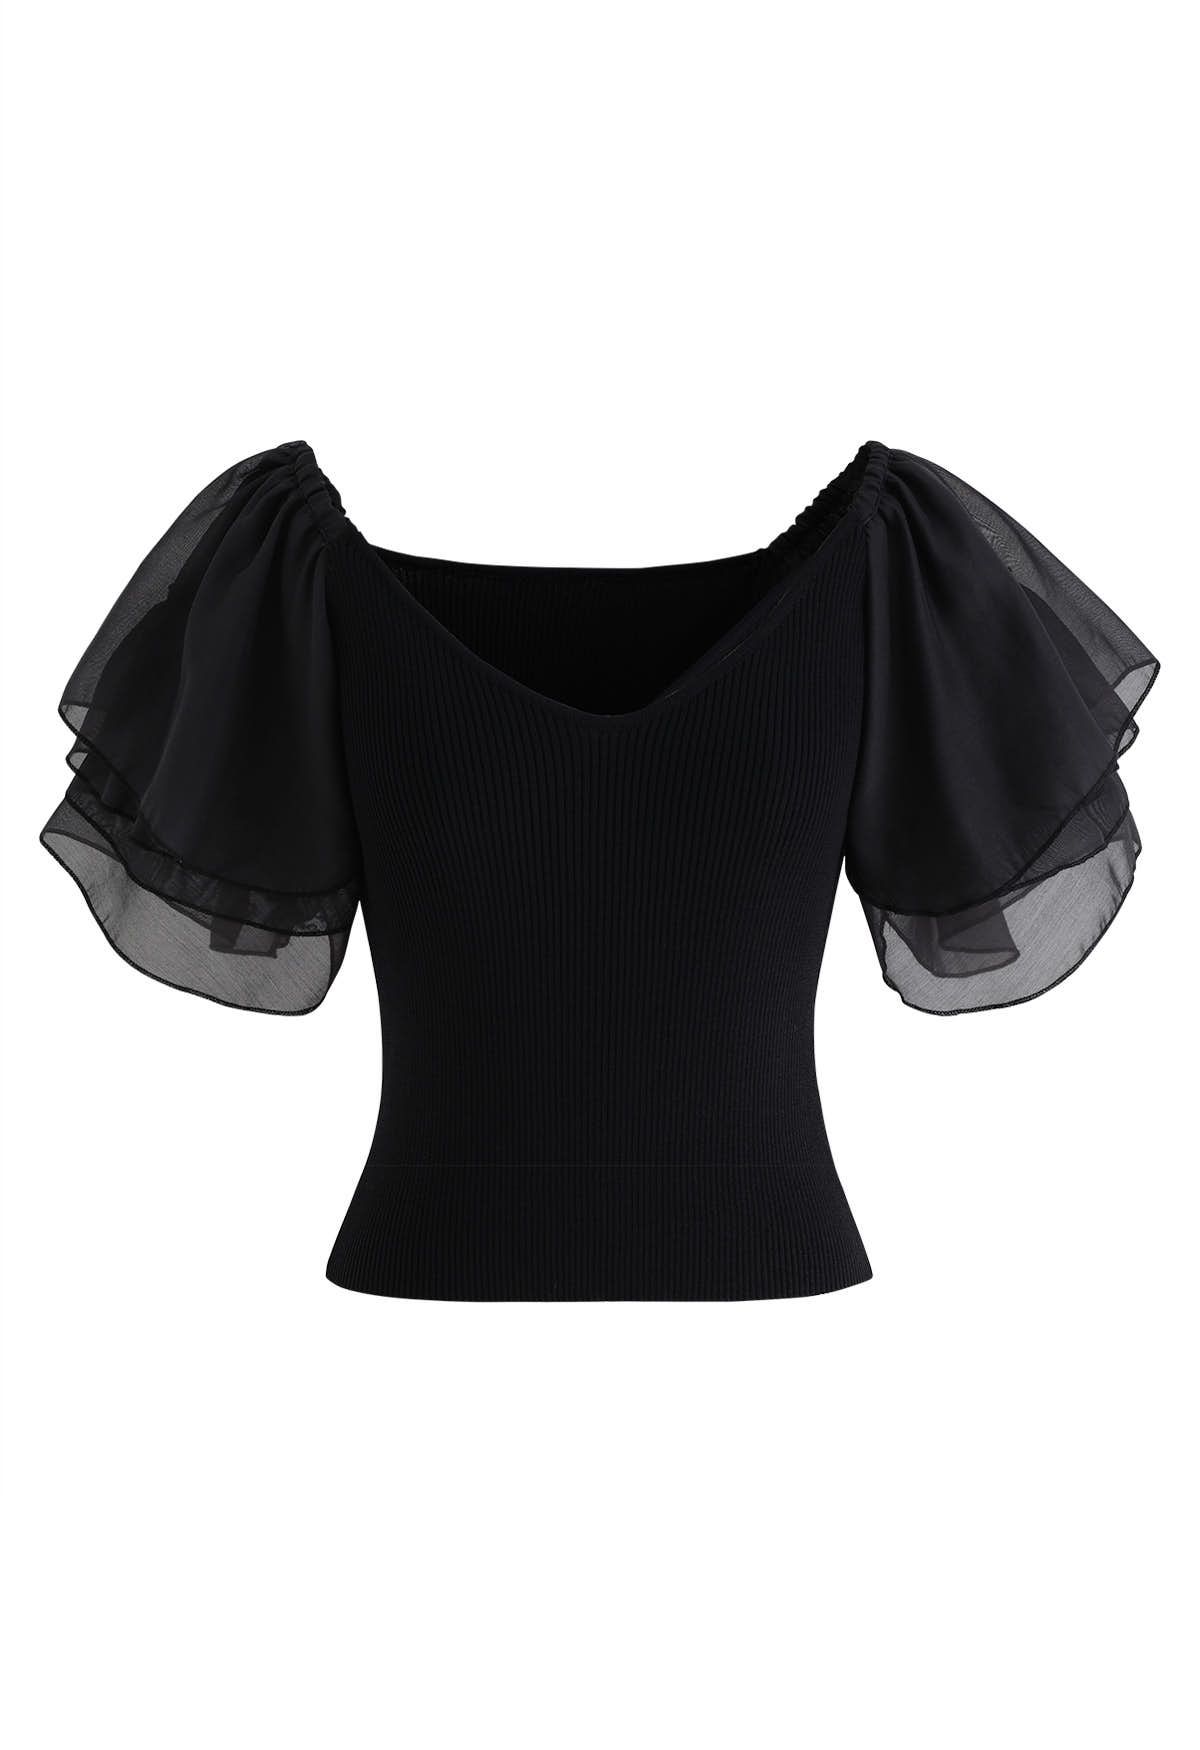 Spliced Tiered Flutter Sleeve Knit Crop Top in Black - Retro, Indie and ...